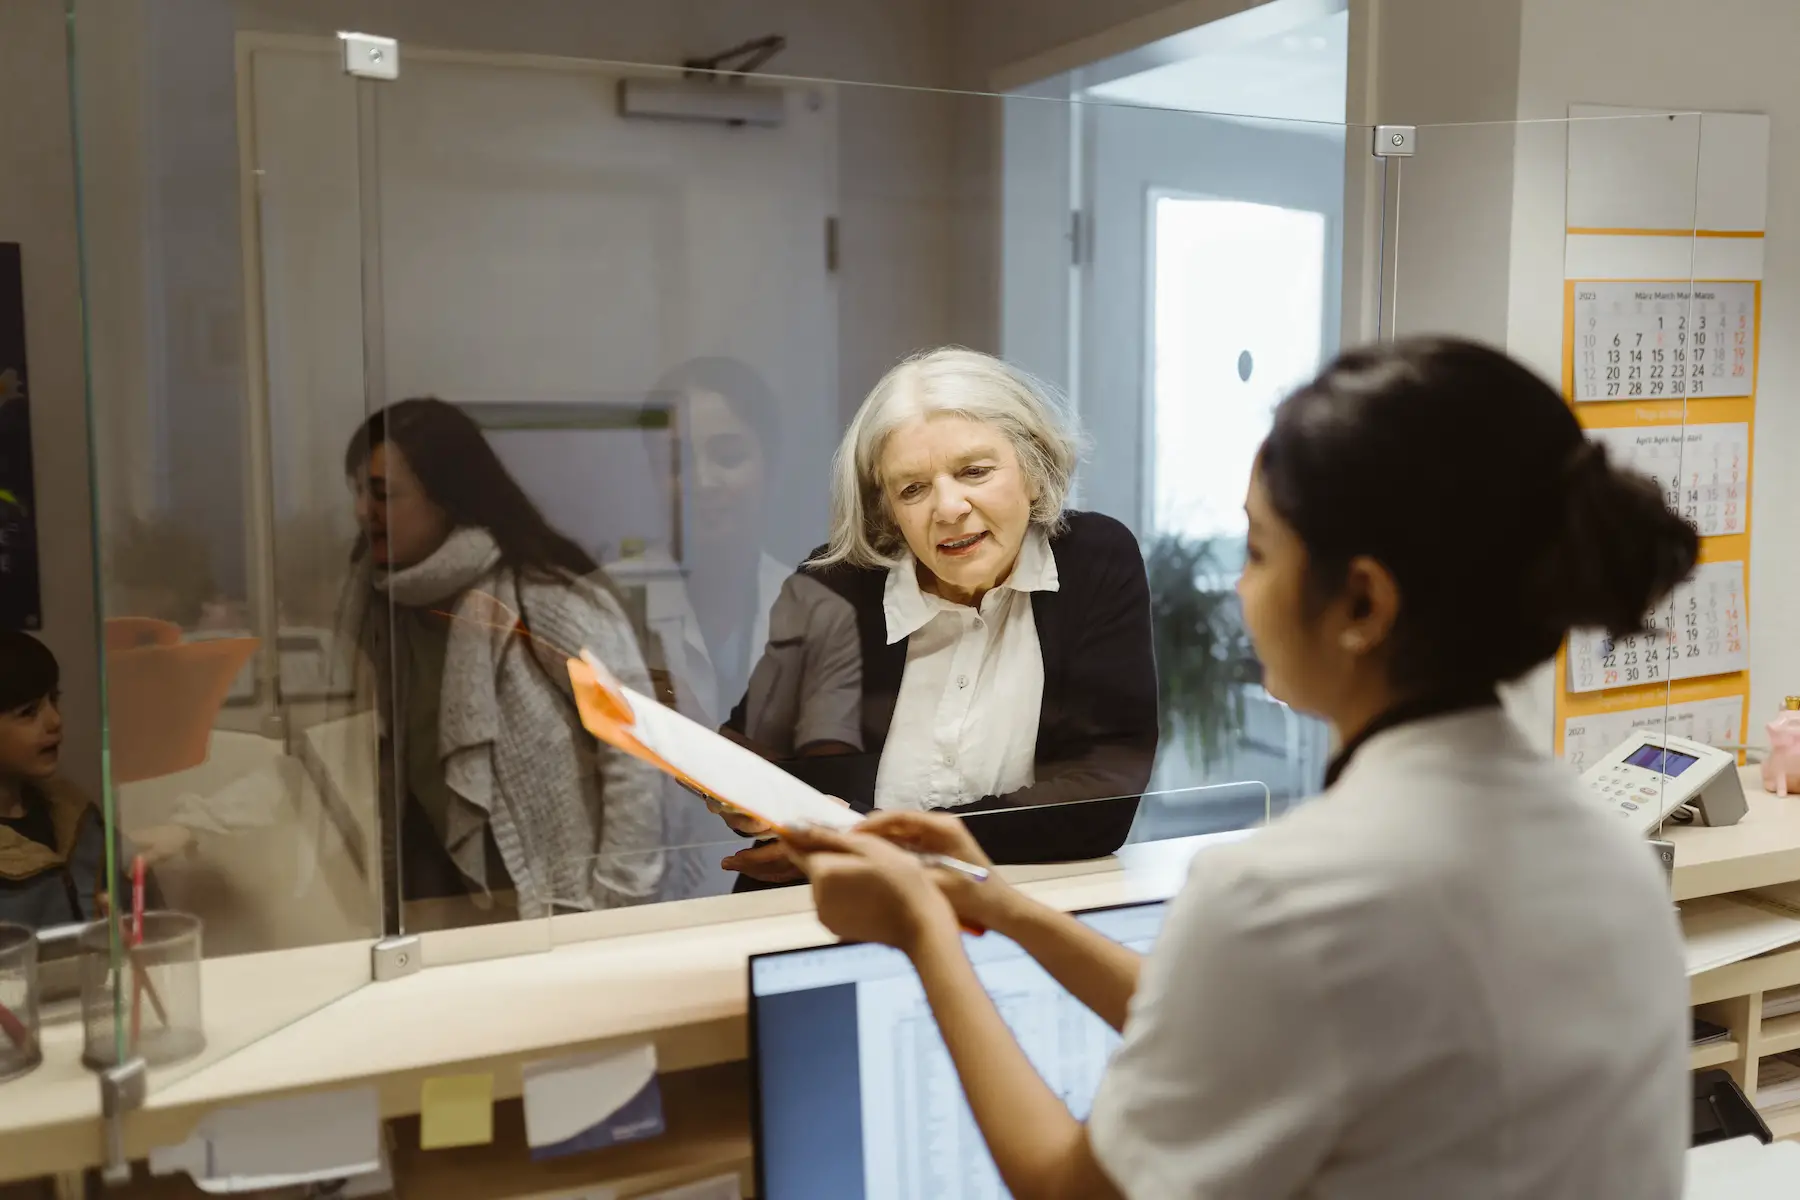 An older patient prepares to pay her medical bill with the receptionist who stands behind a desk